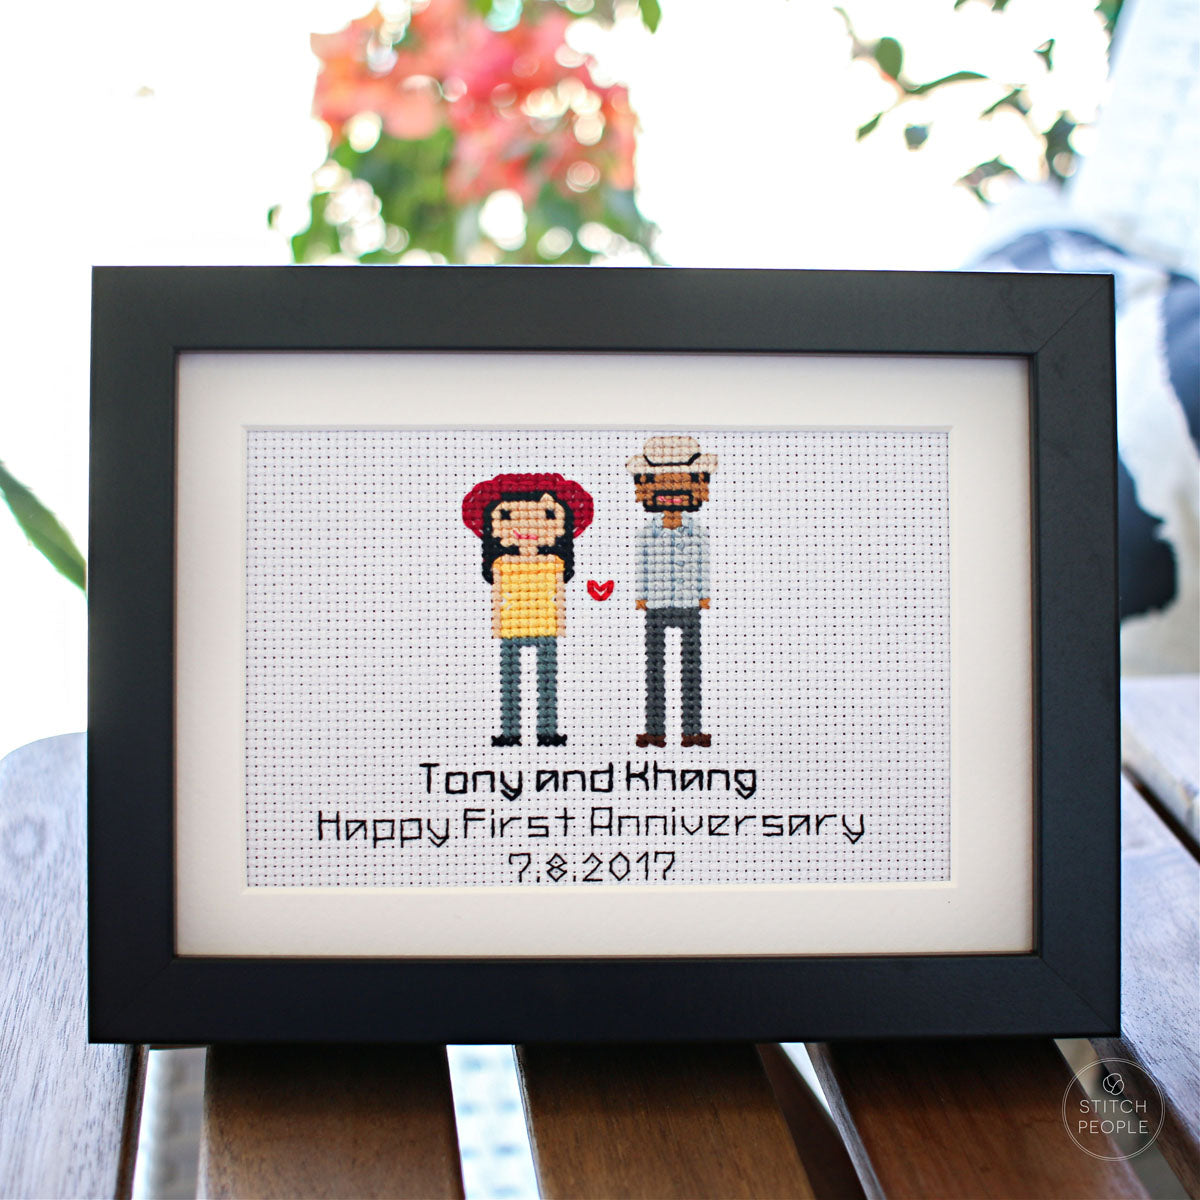 The Ultimate Cross Stitch Portrait Thread Collection by Stitch People